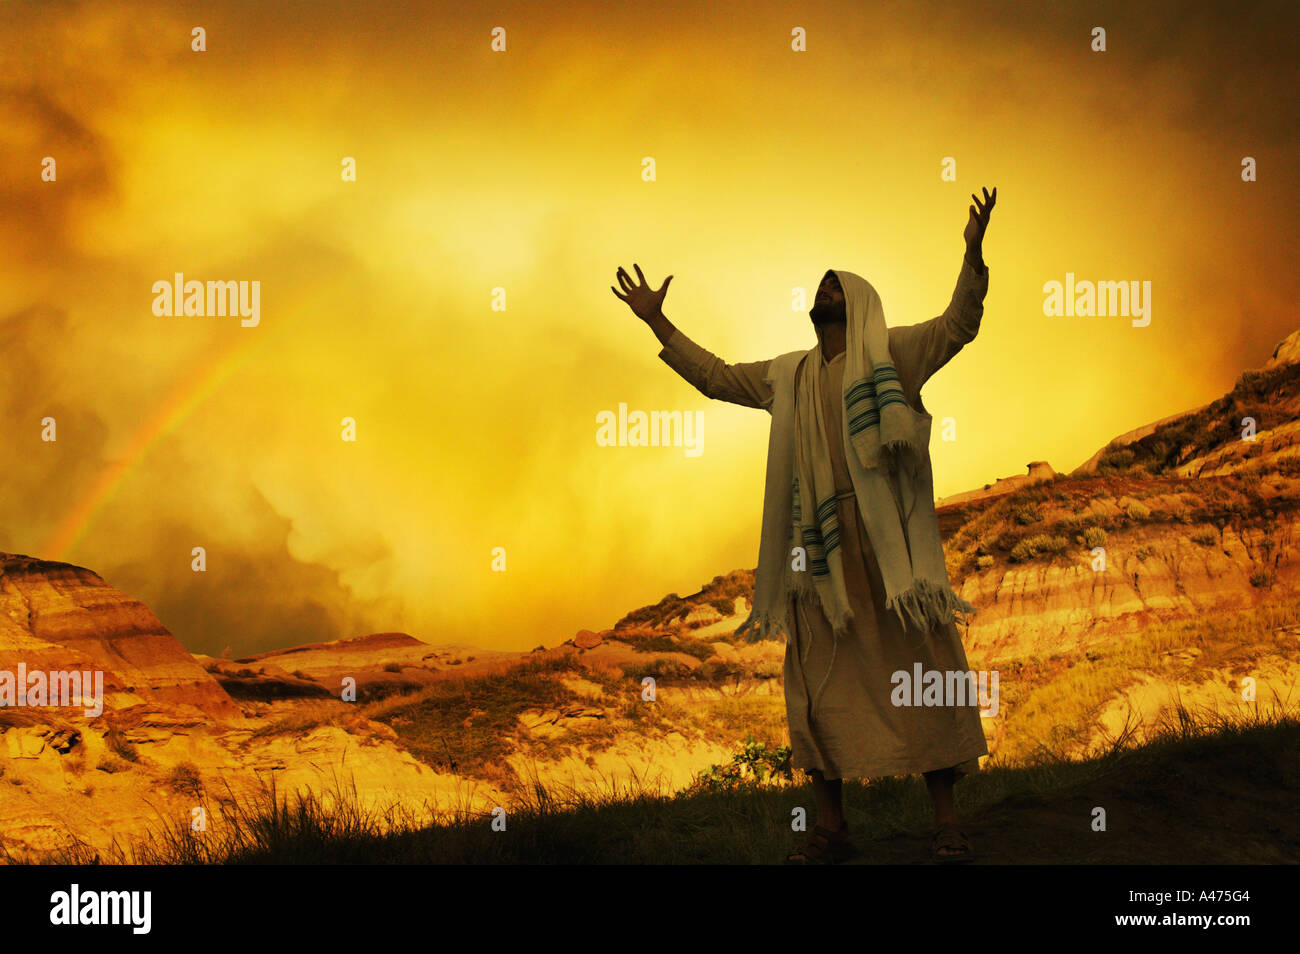 Jesus with arms stretched towards heaven Stock Photo